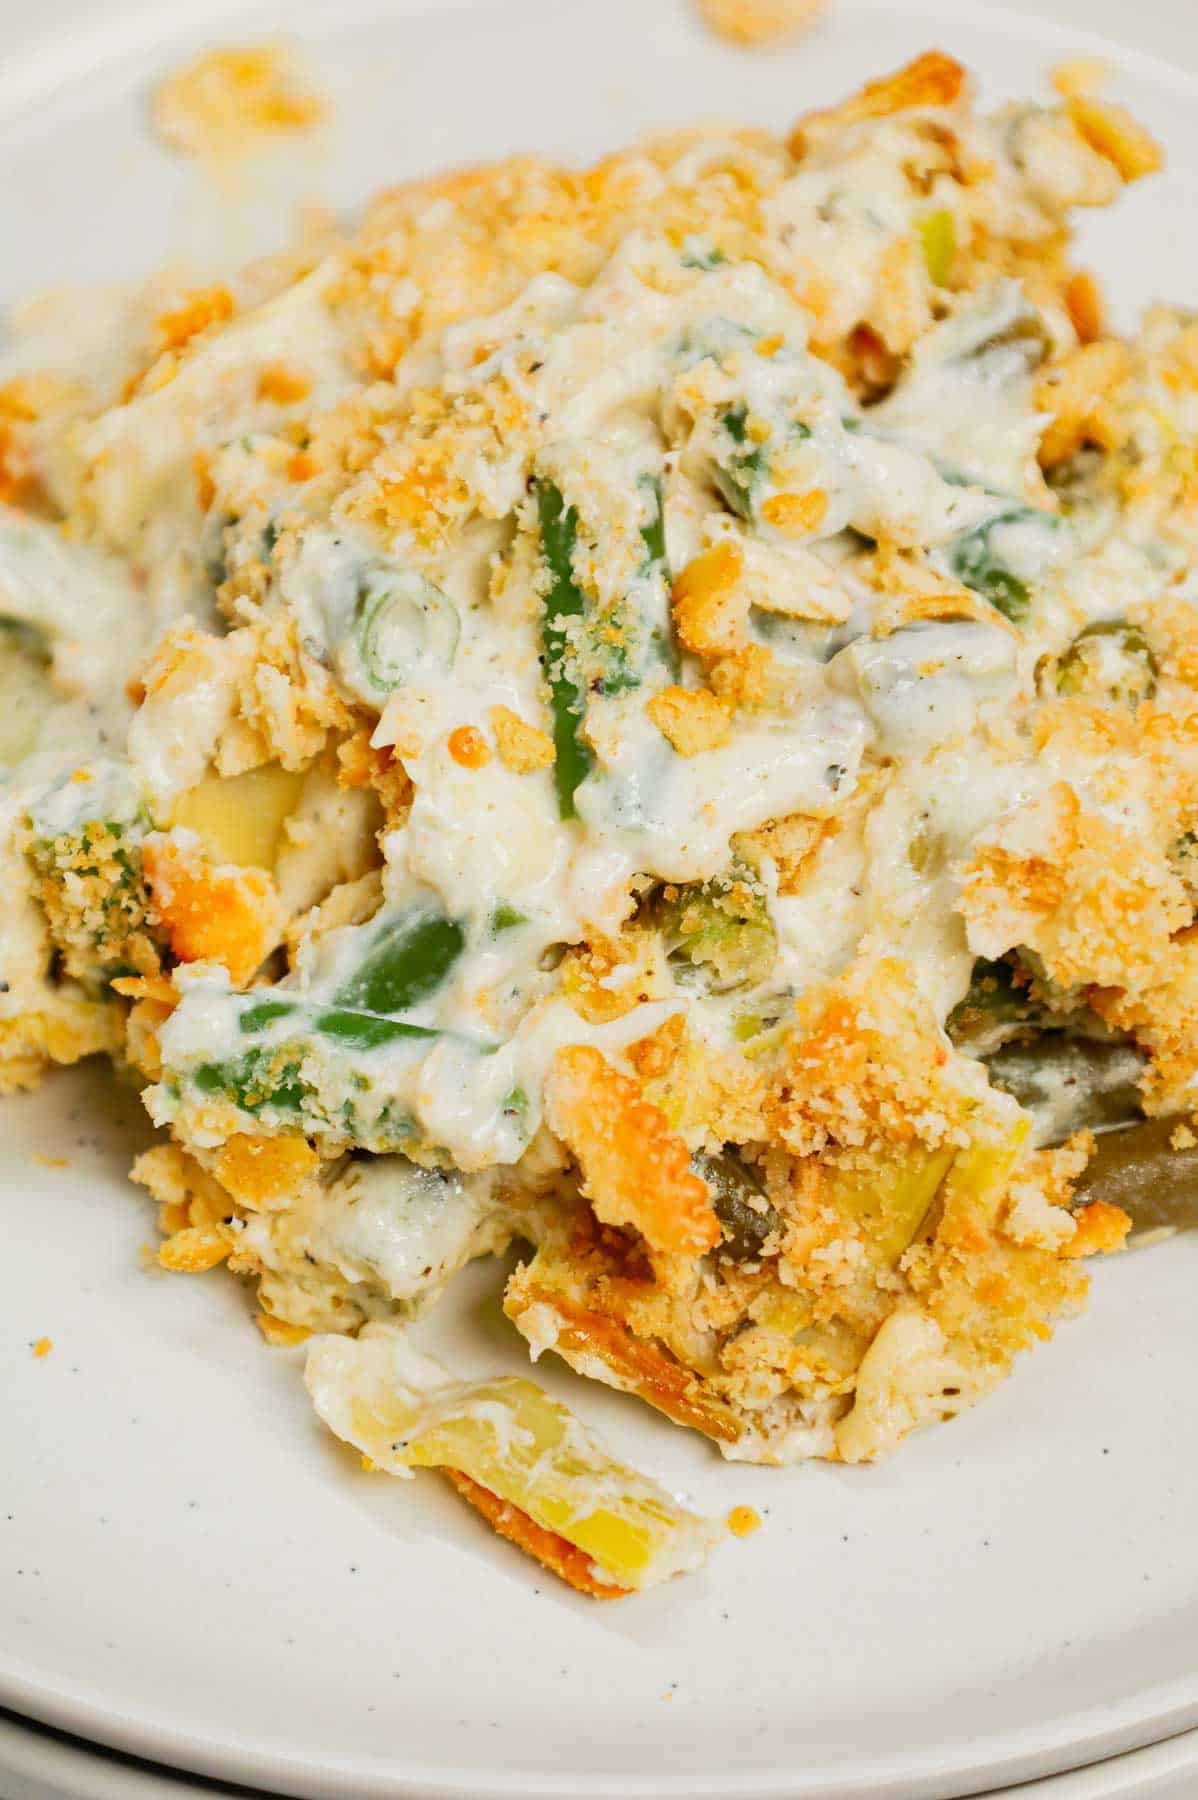 Green Bean Artichoke Casserole is a delicious holiday side dish recipe loaded with cut green beans, artichoke hears, cream cheese, sour cream, mozzarella cheese and parmesan cheese with a crushed Ritz cracker topping.